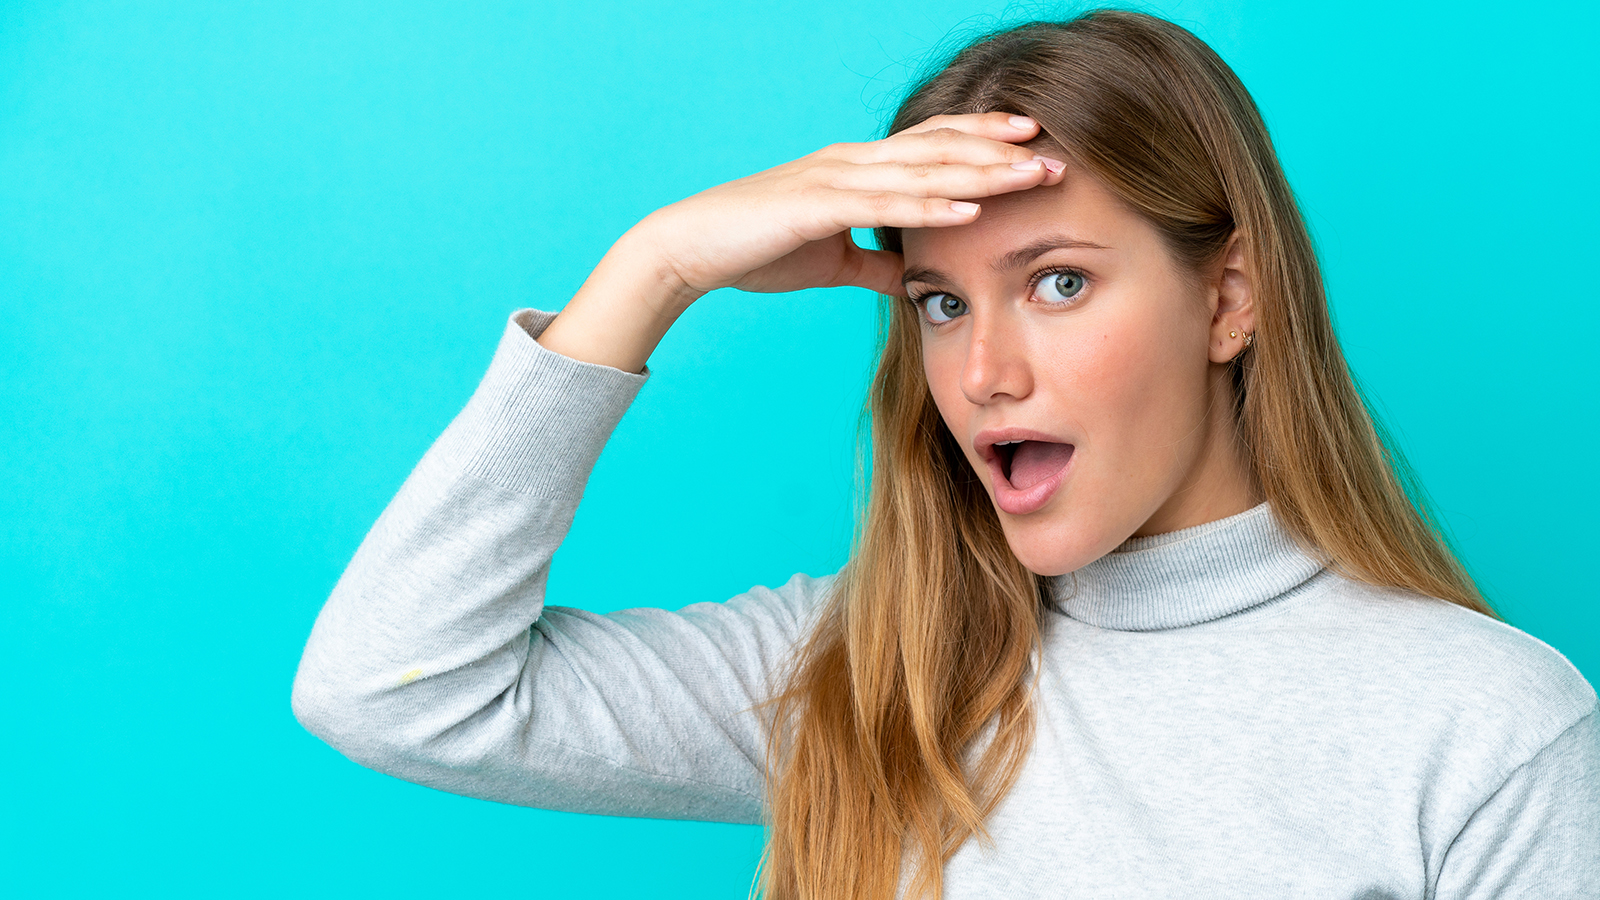 Young blonde woman isolated on blue background doing surprise gesture while looking to the side